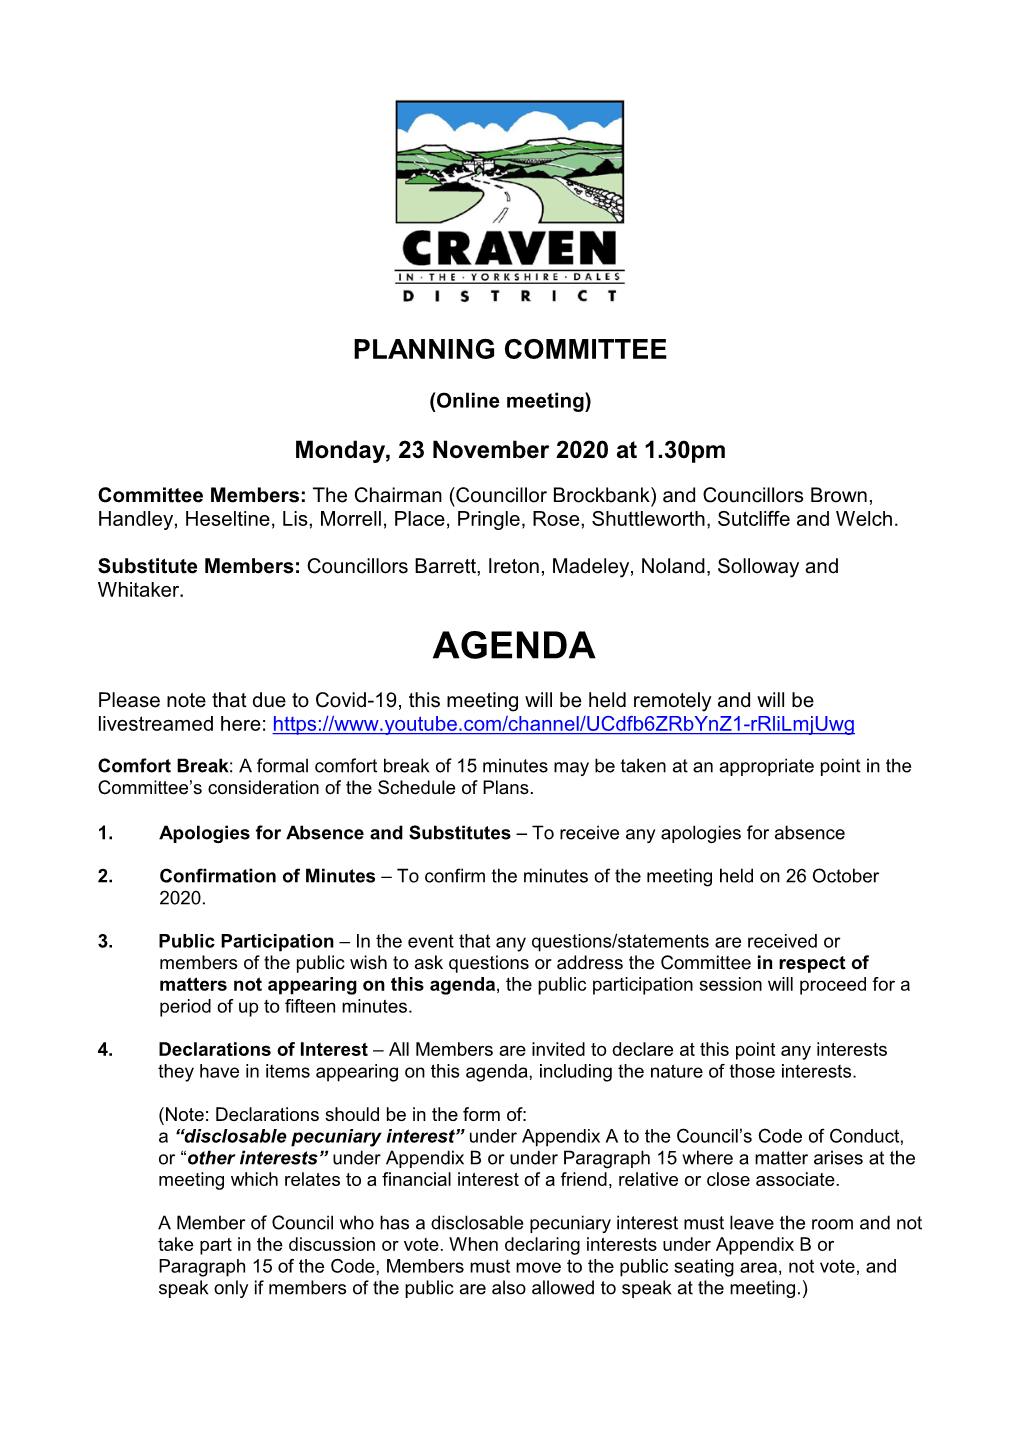 Planning Committee Agenda and Reports